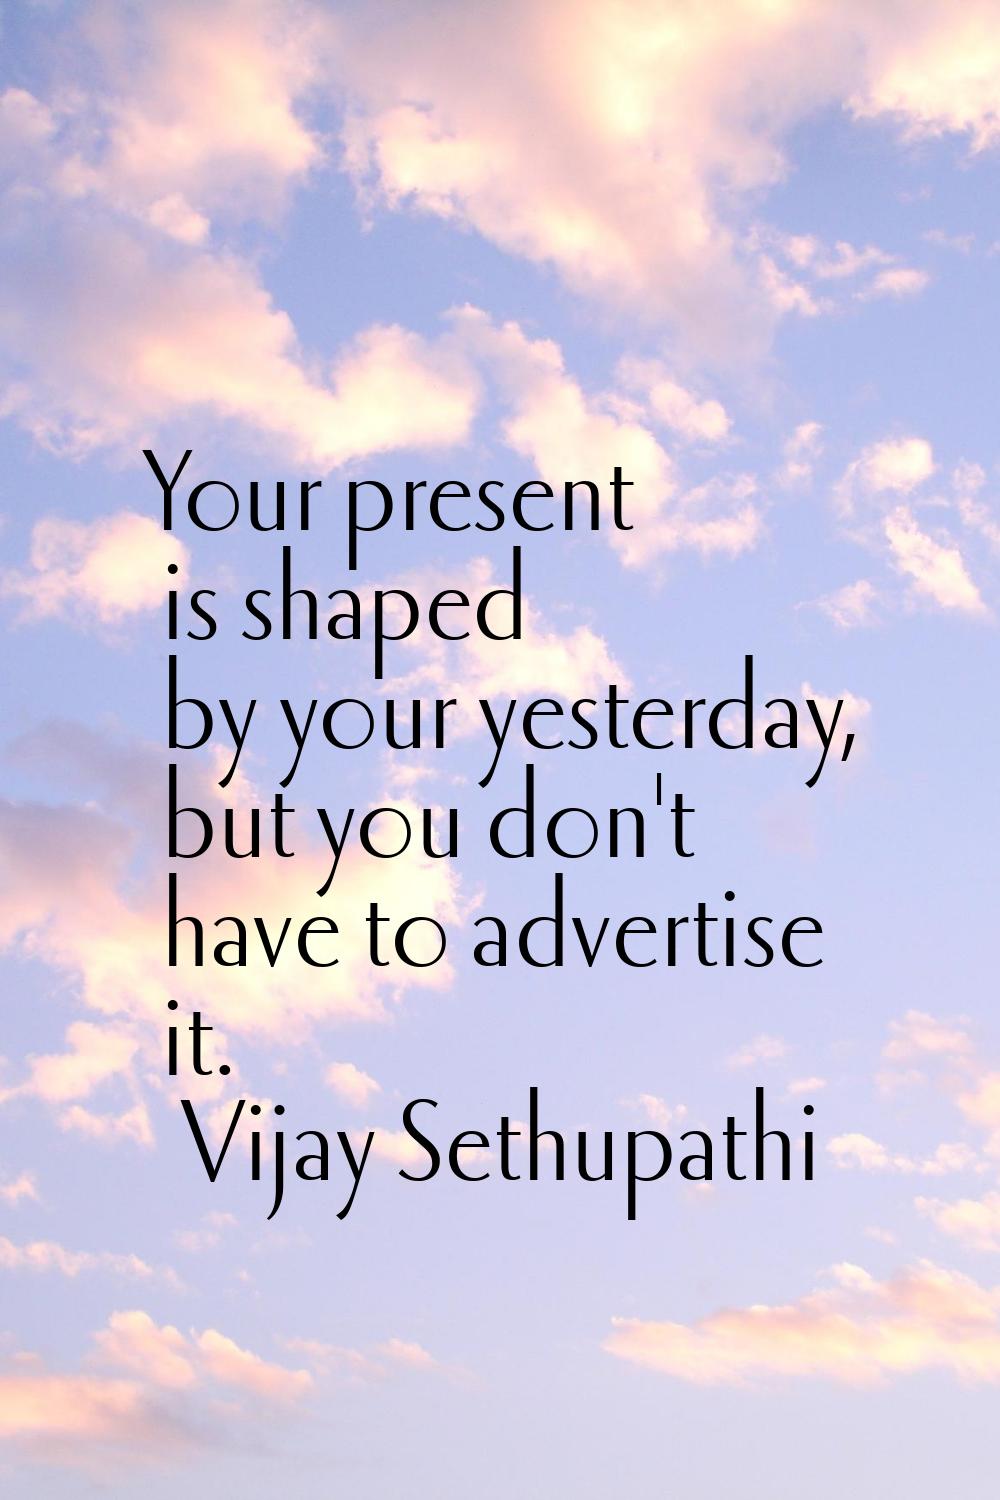 Your present is shaped by your yesterday, but you don't have to advertise it.